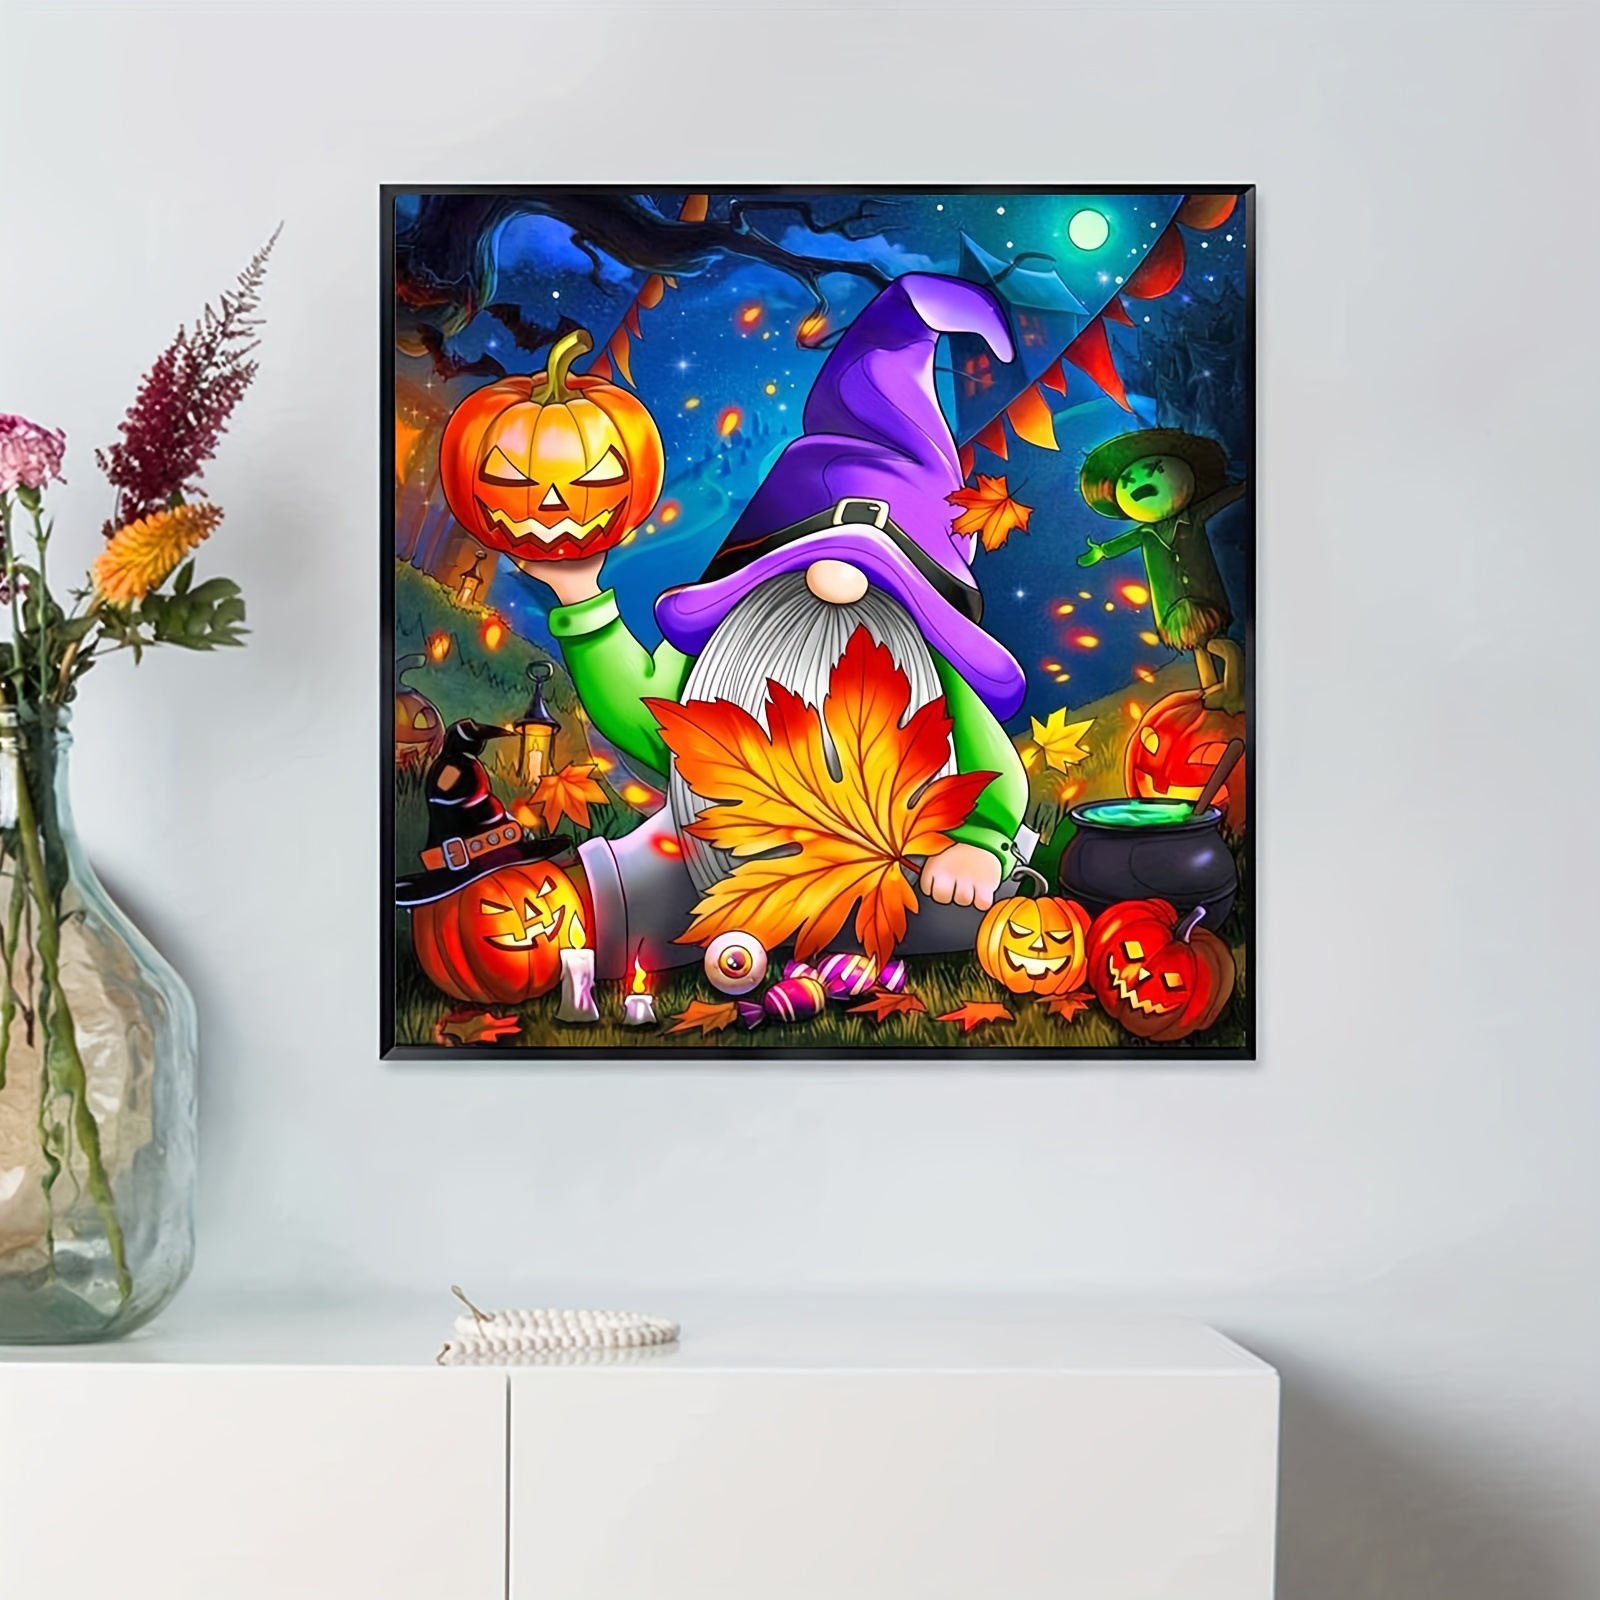 Diamond Painting Kits for Adults,Nightmare Before Christmas